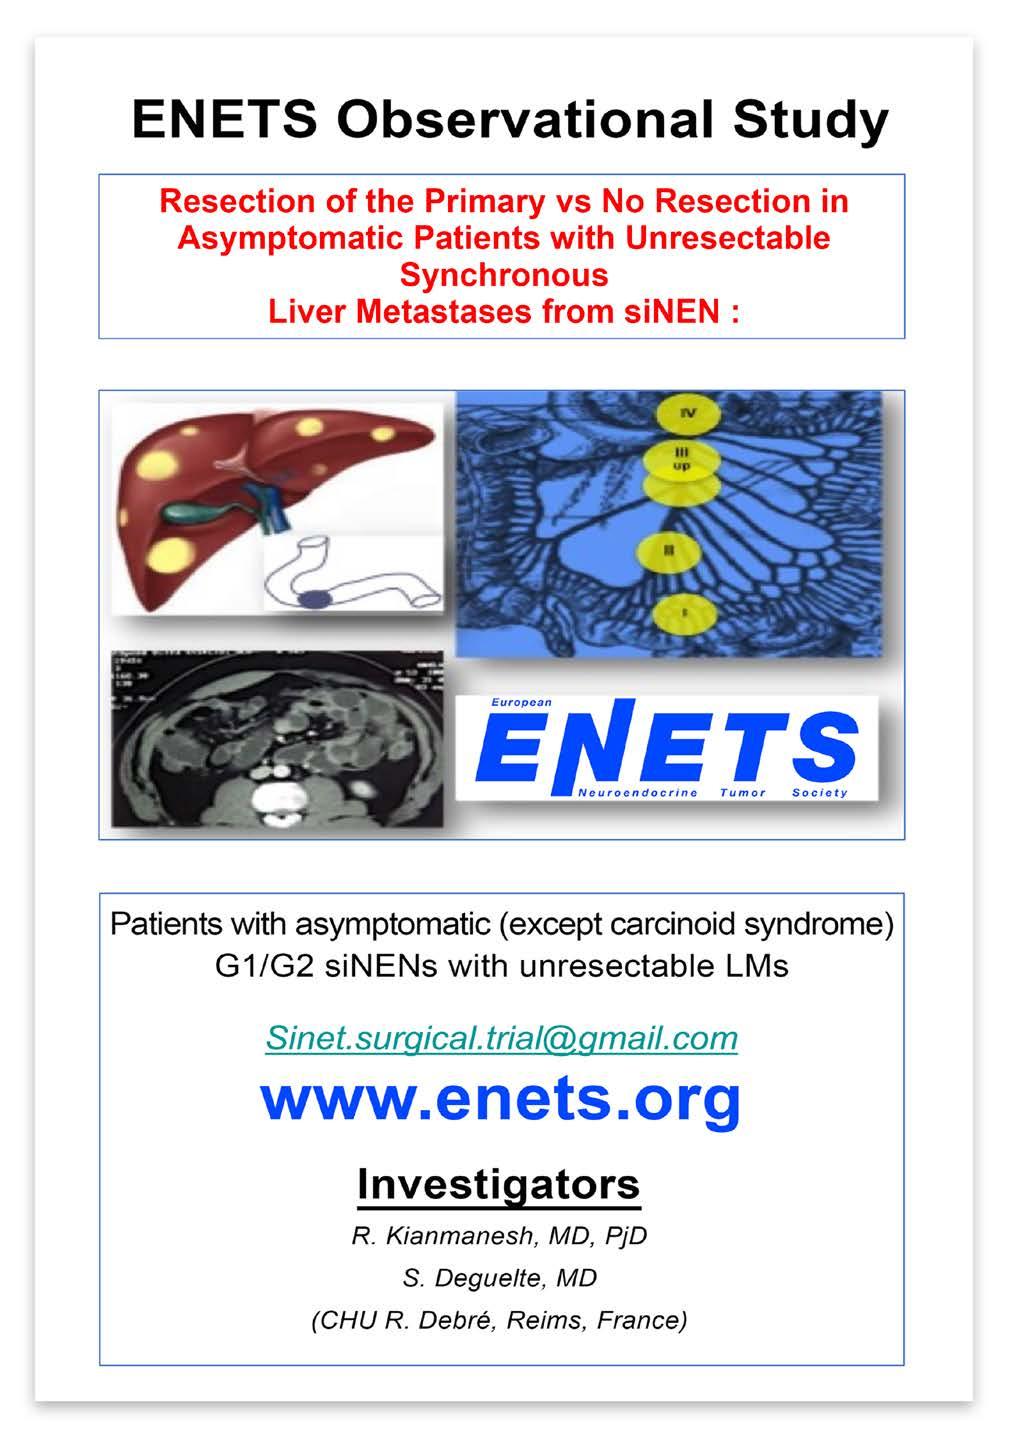 ENETS Supported Study 76